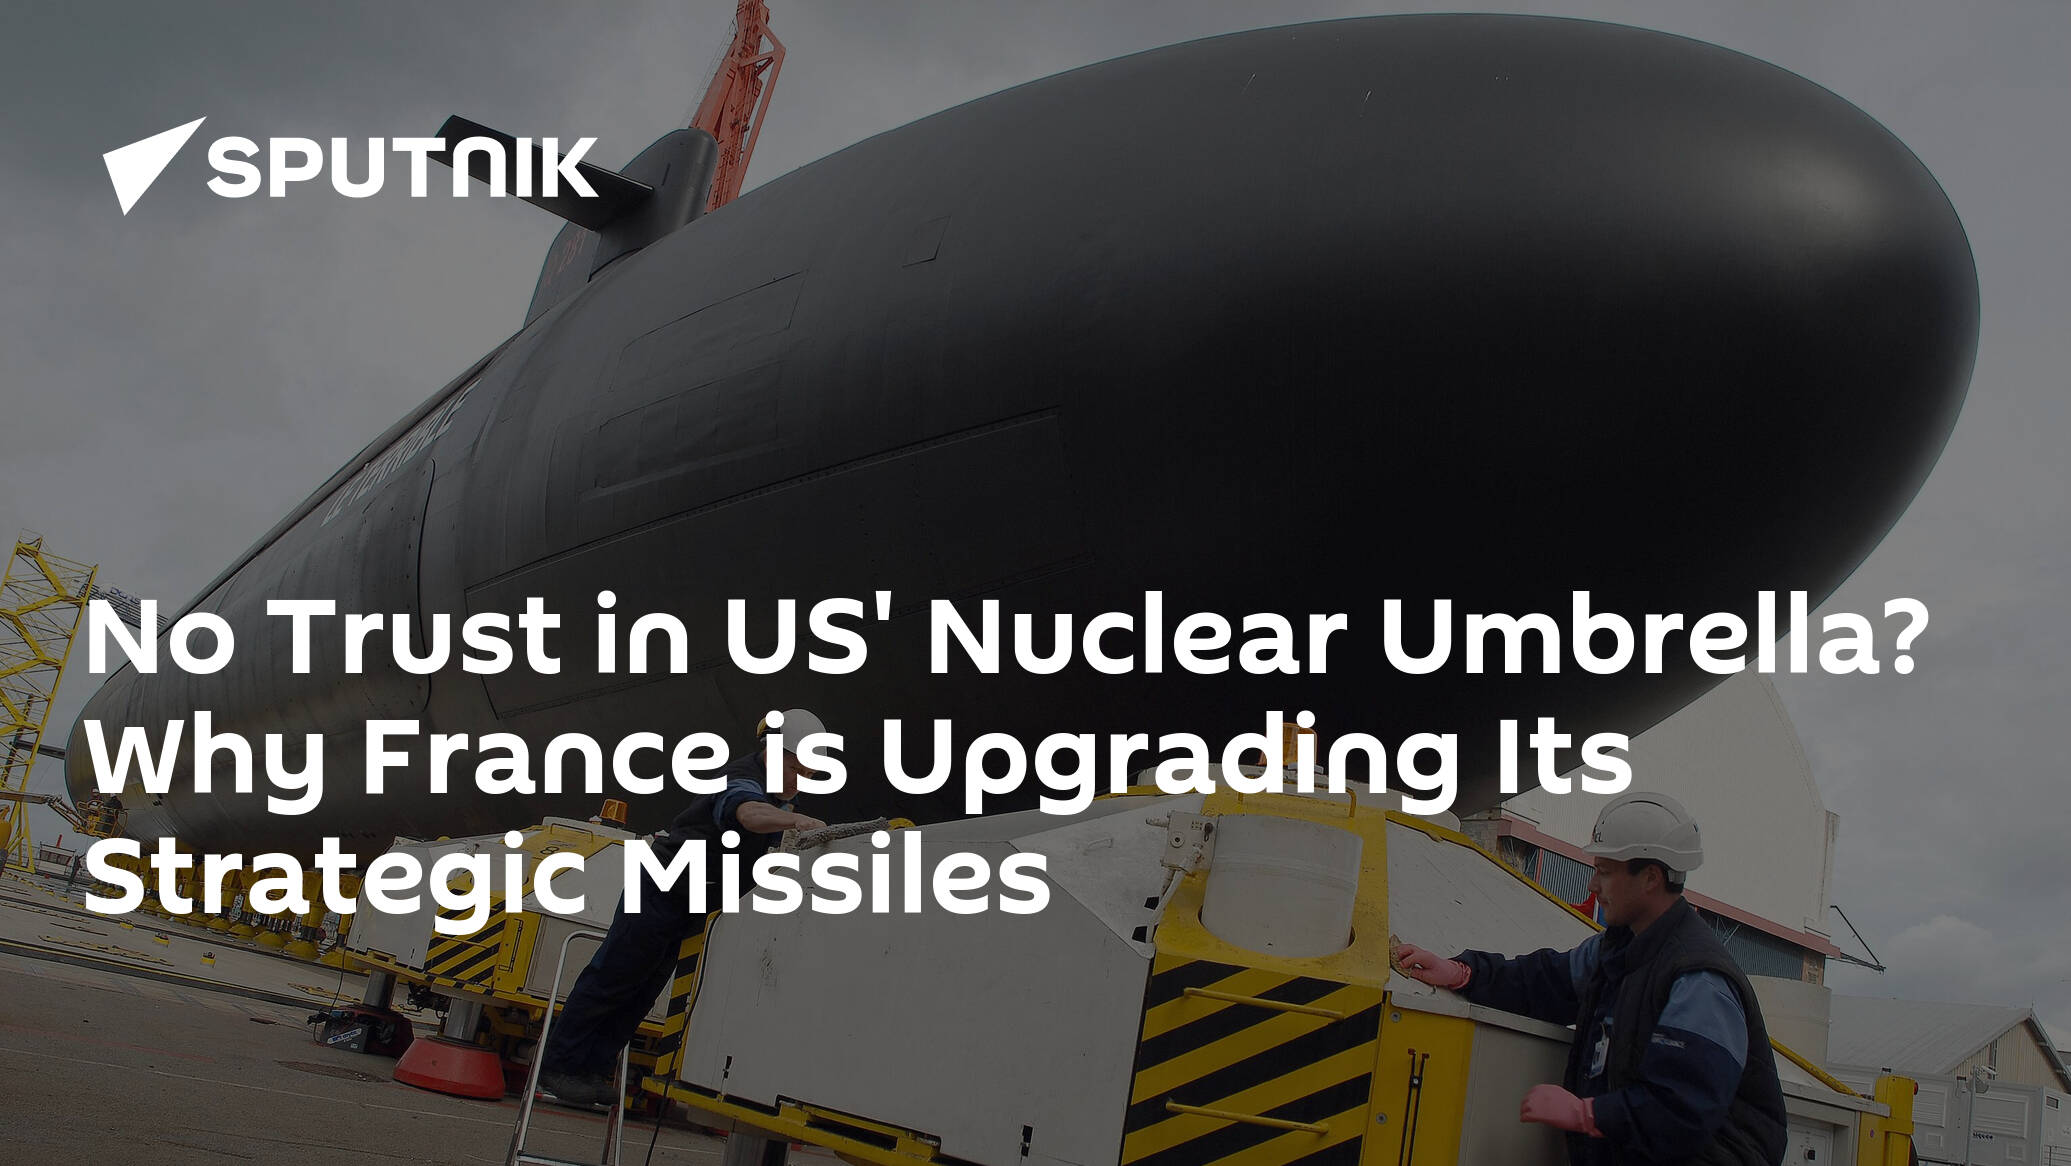 No Trust in US' Nuclear Umbrella? Why France is Upgrading Its Strategic Missiles